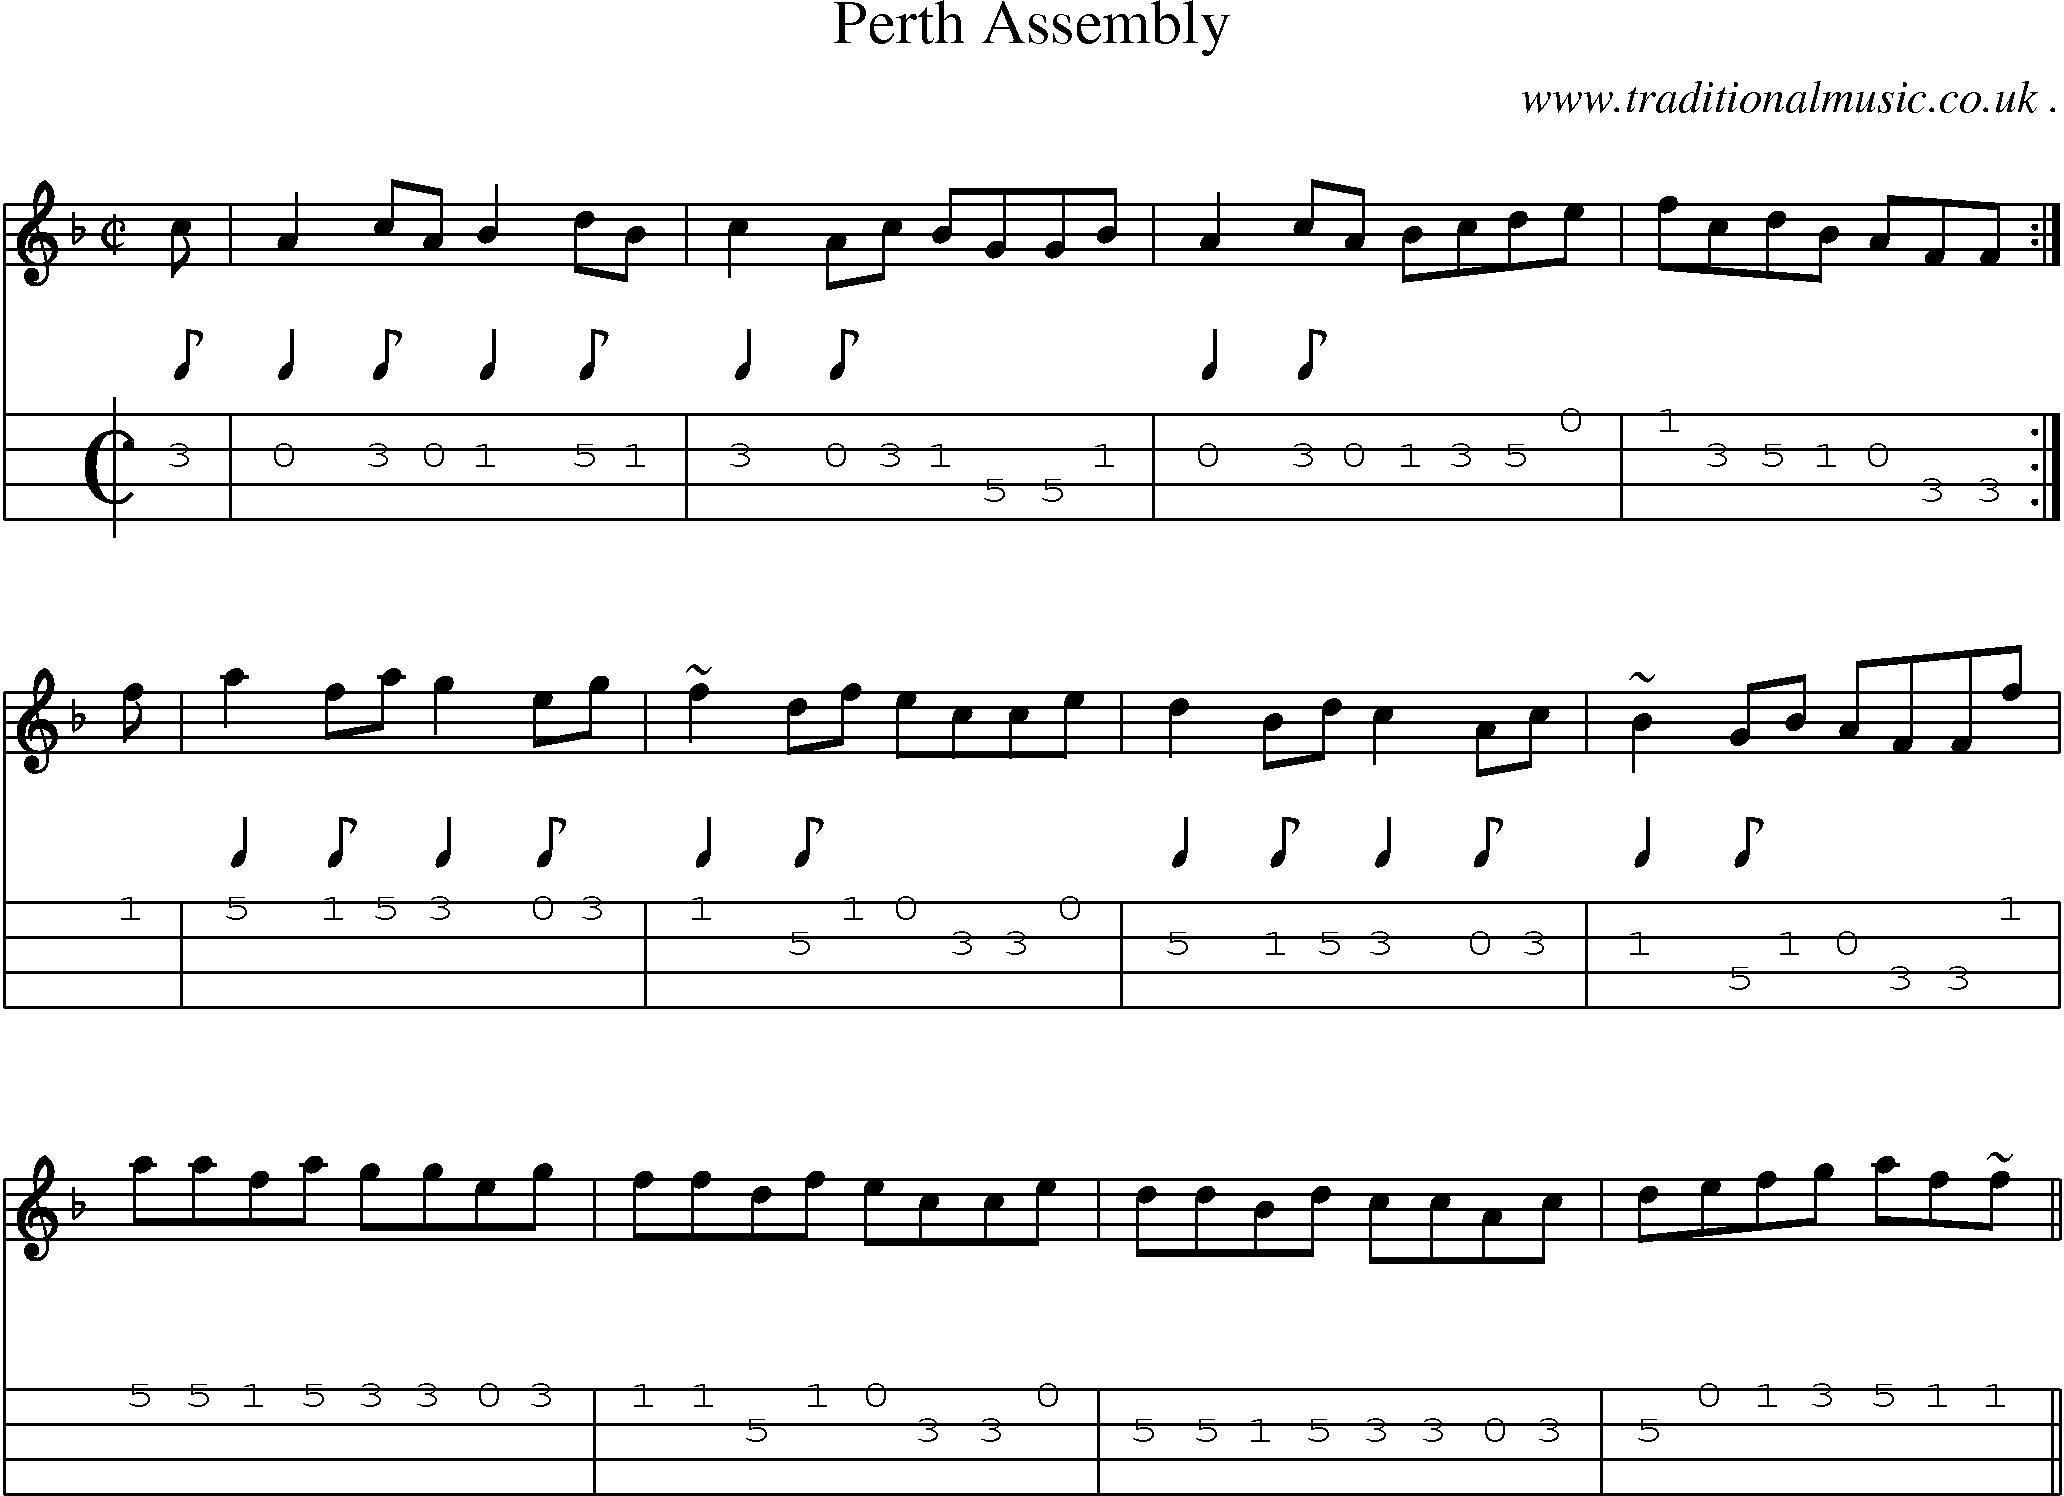 Sheet-music  score, Chords and Mandolin Tabs for Perth Assembly